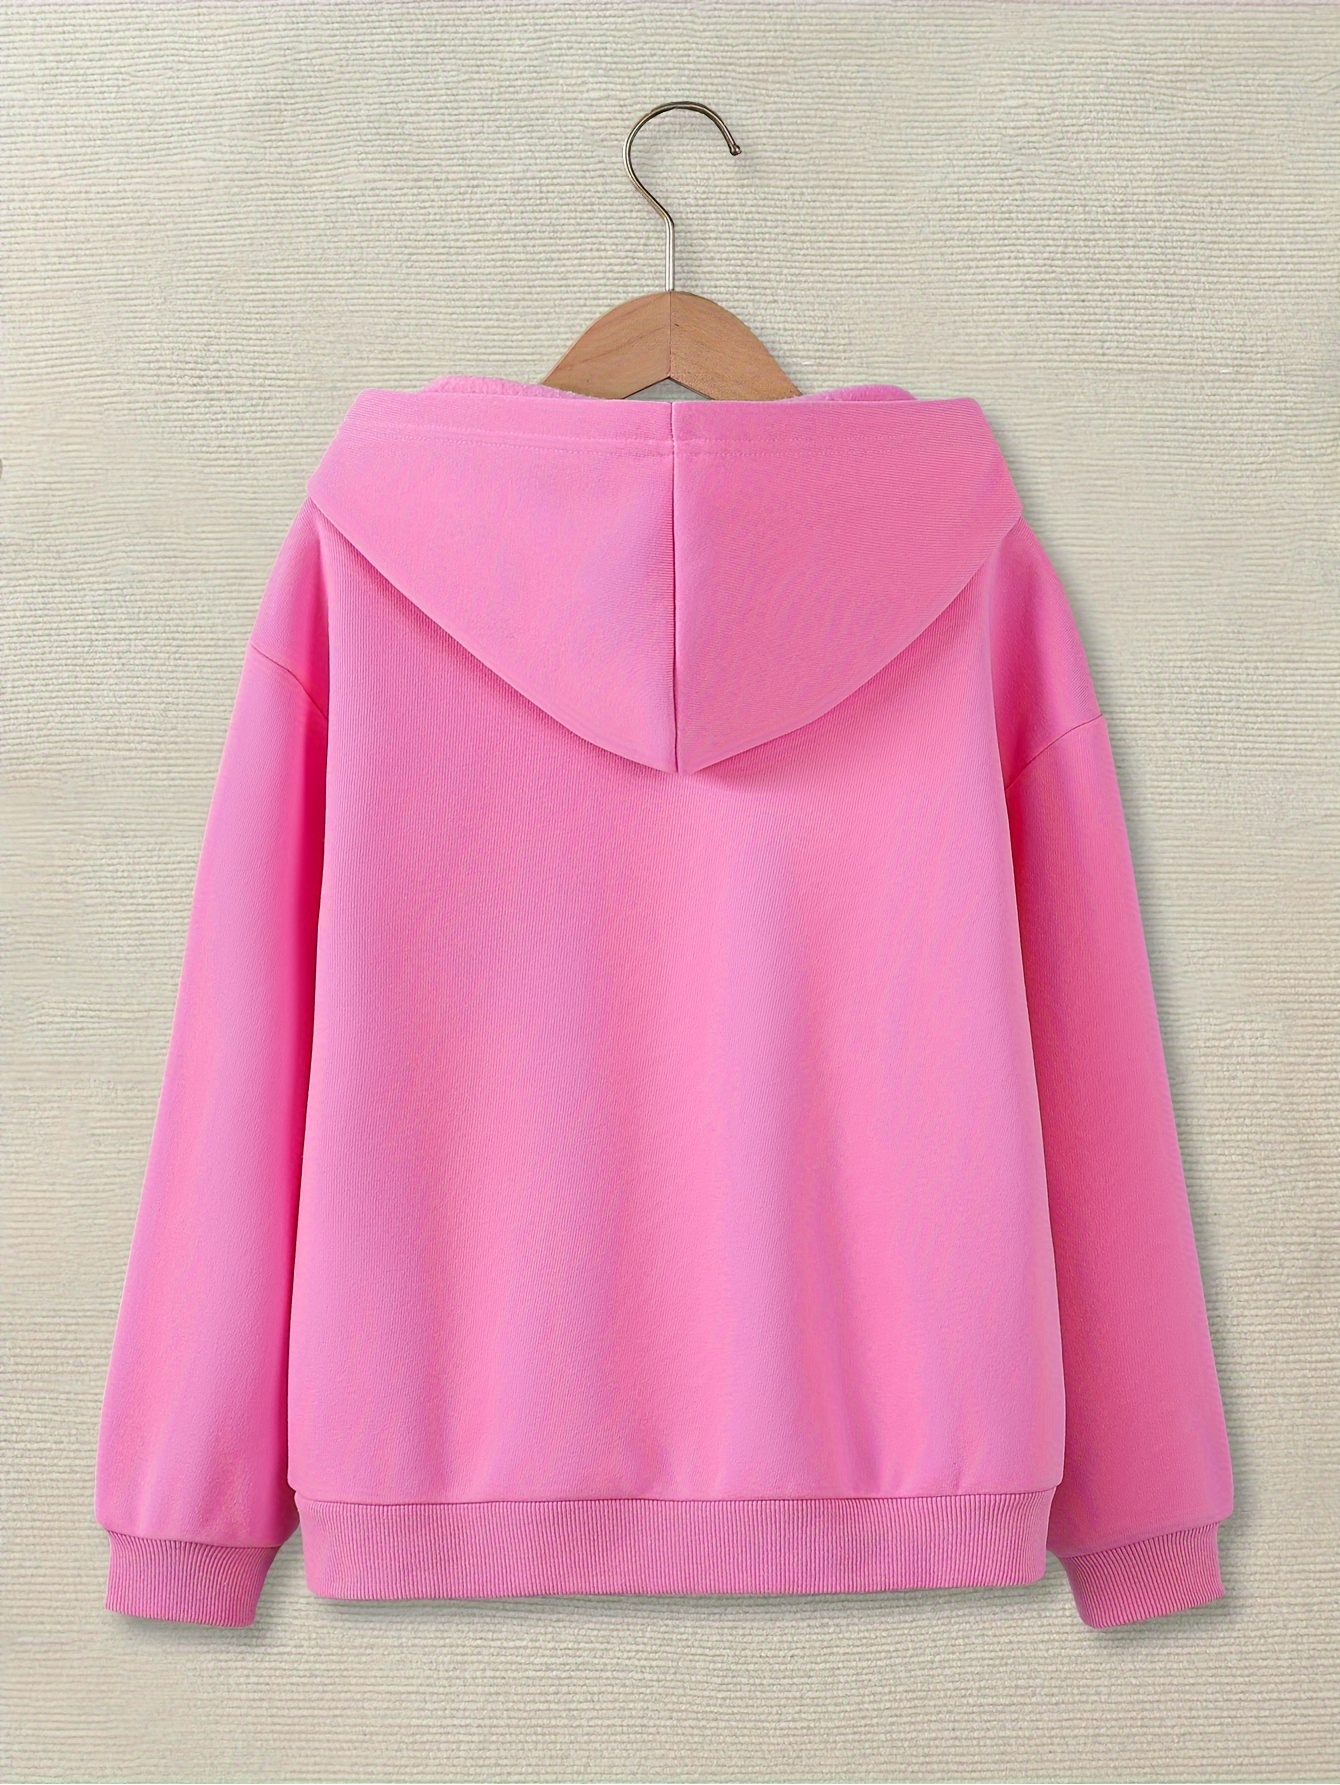 LOVE SWEATSHIRT. Pink with bright red print.